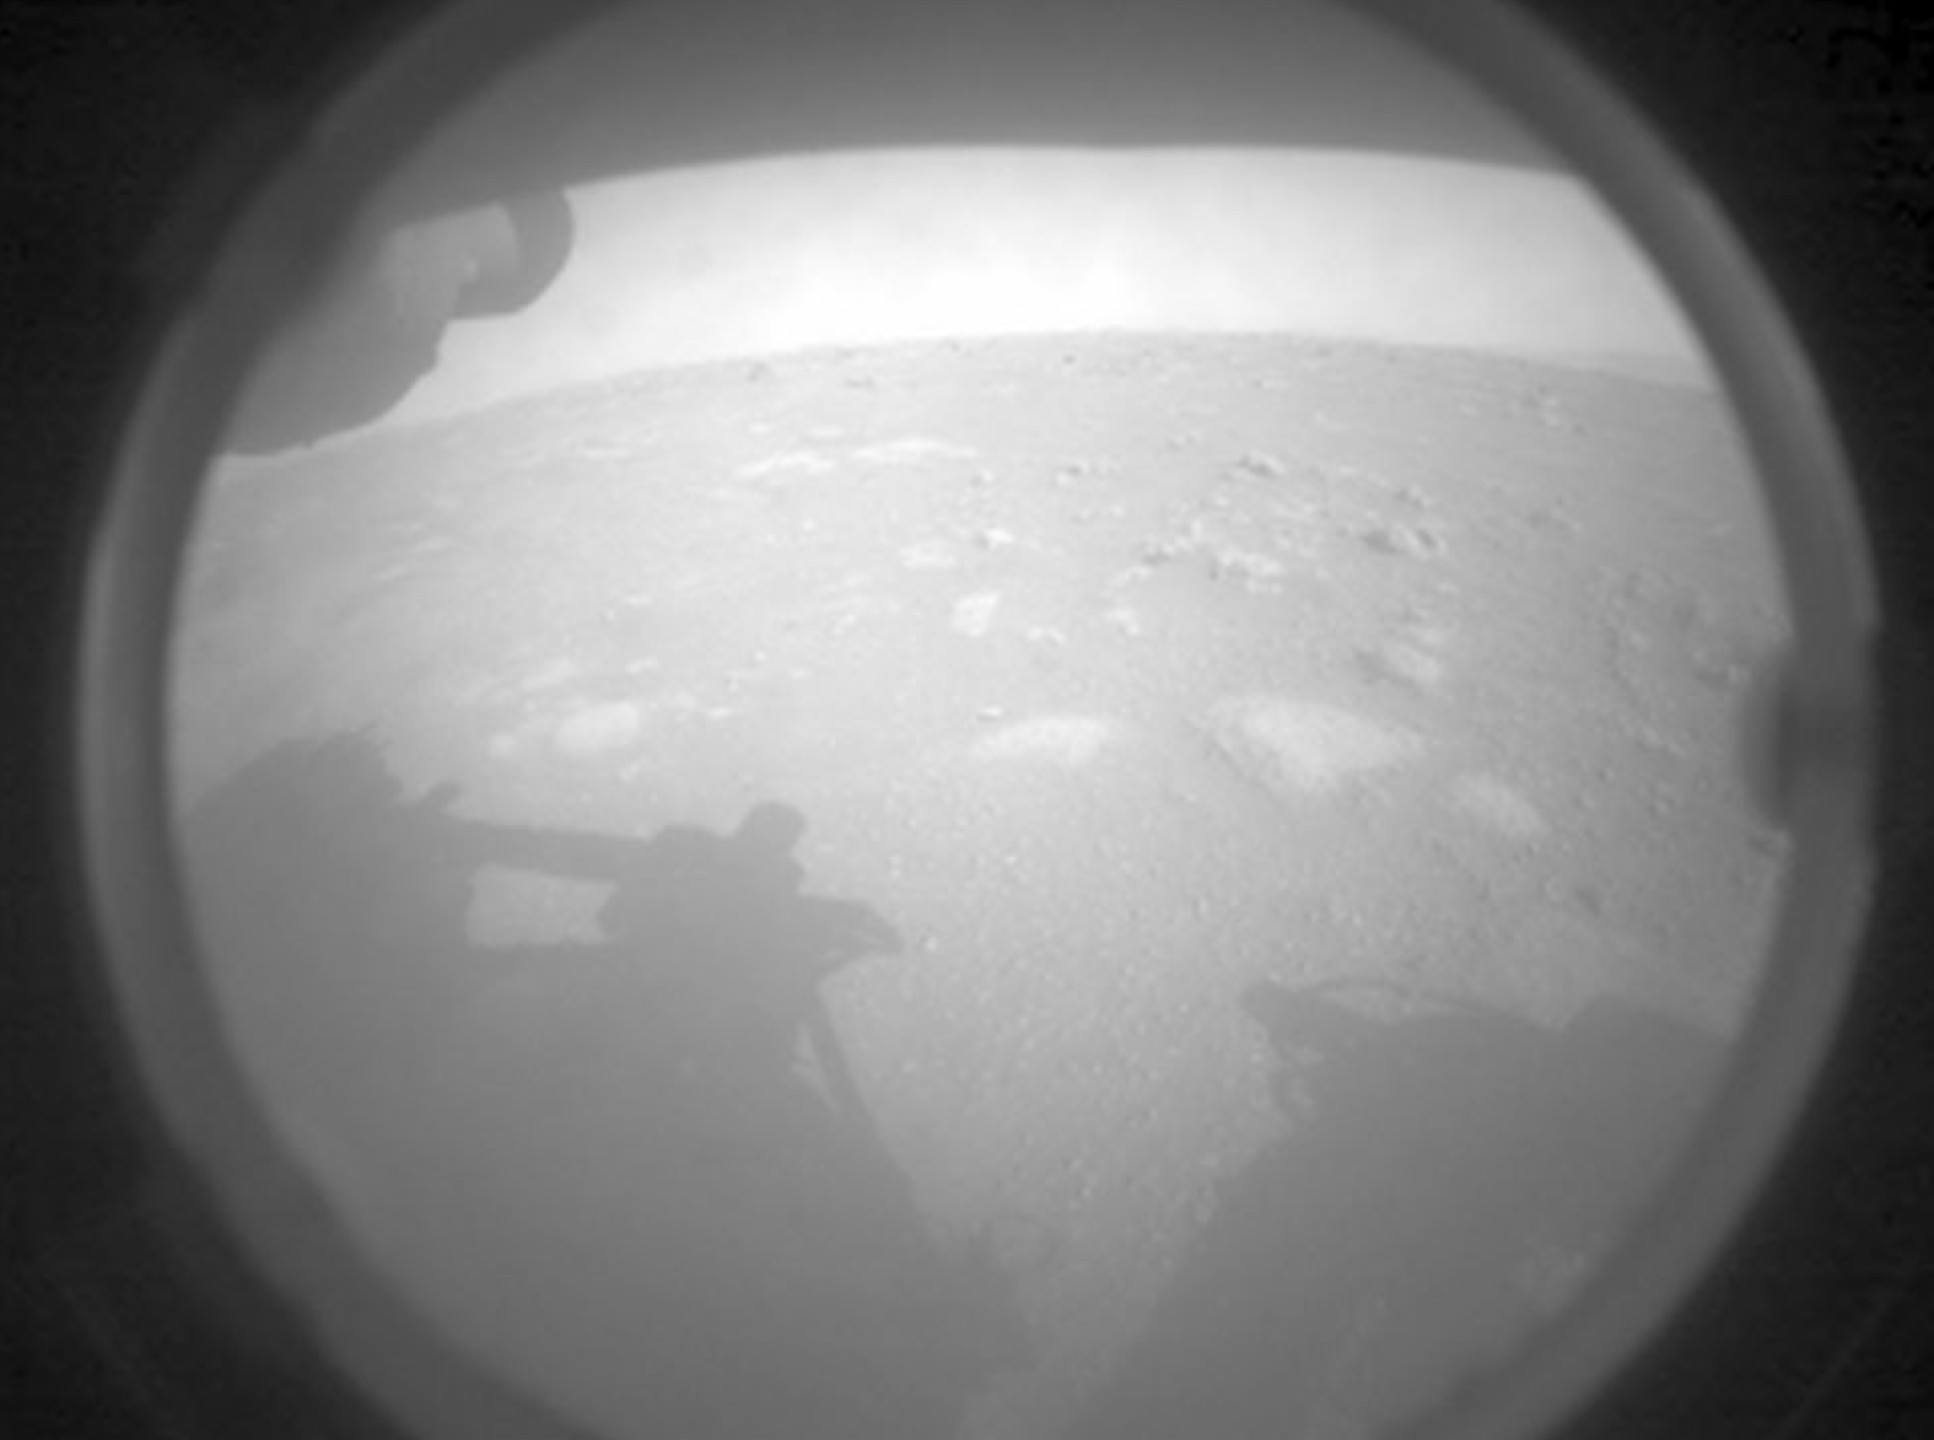 Black and white photo of a rocky landscape with a shadow of the rover